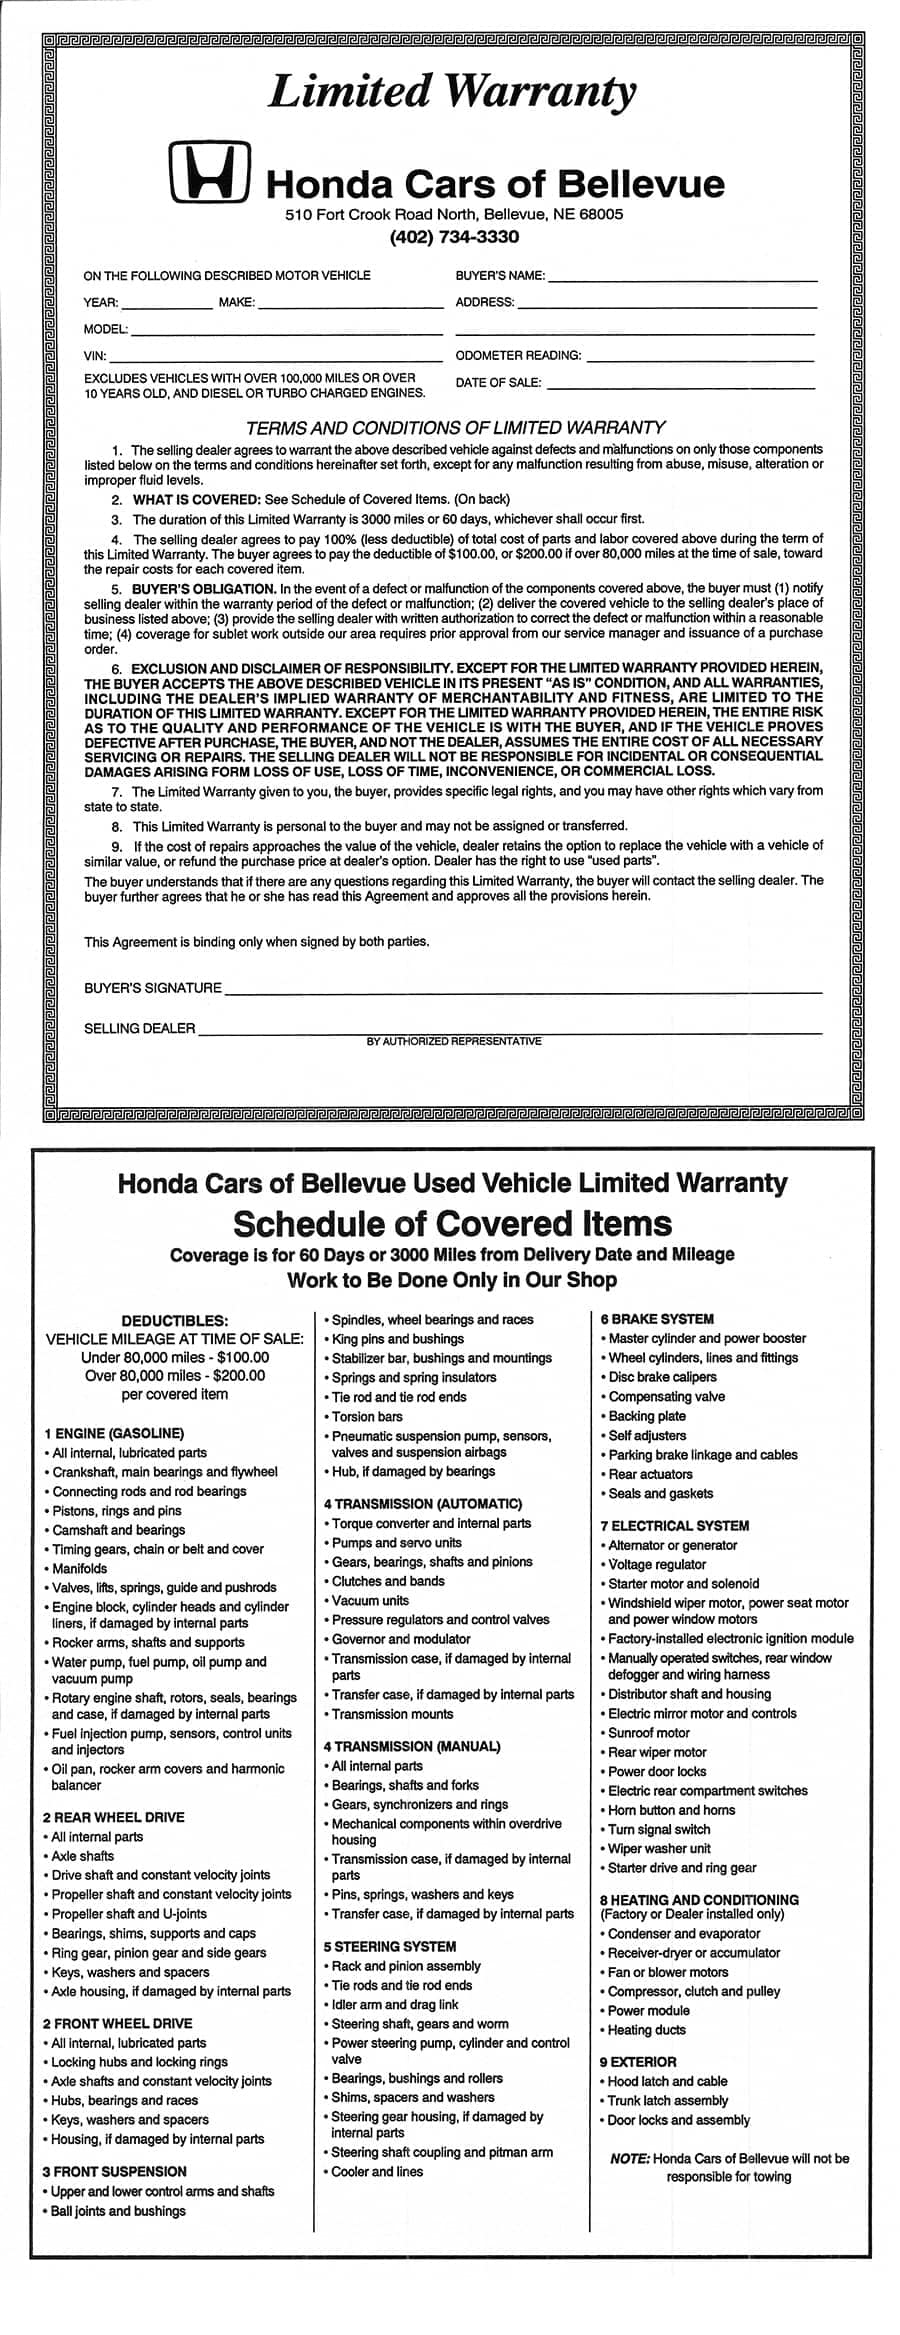 60-Day-Warranty contract